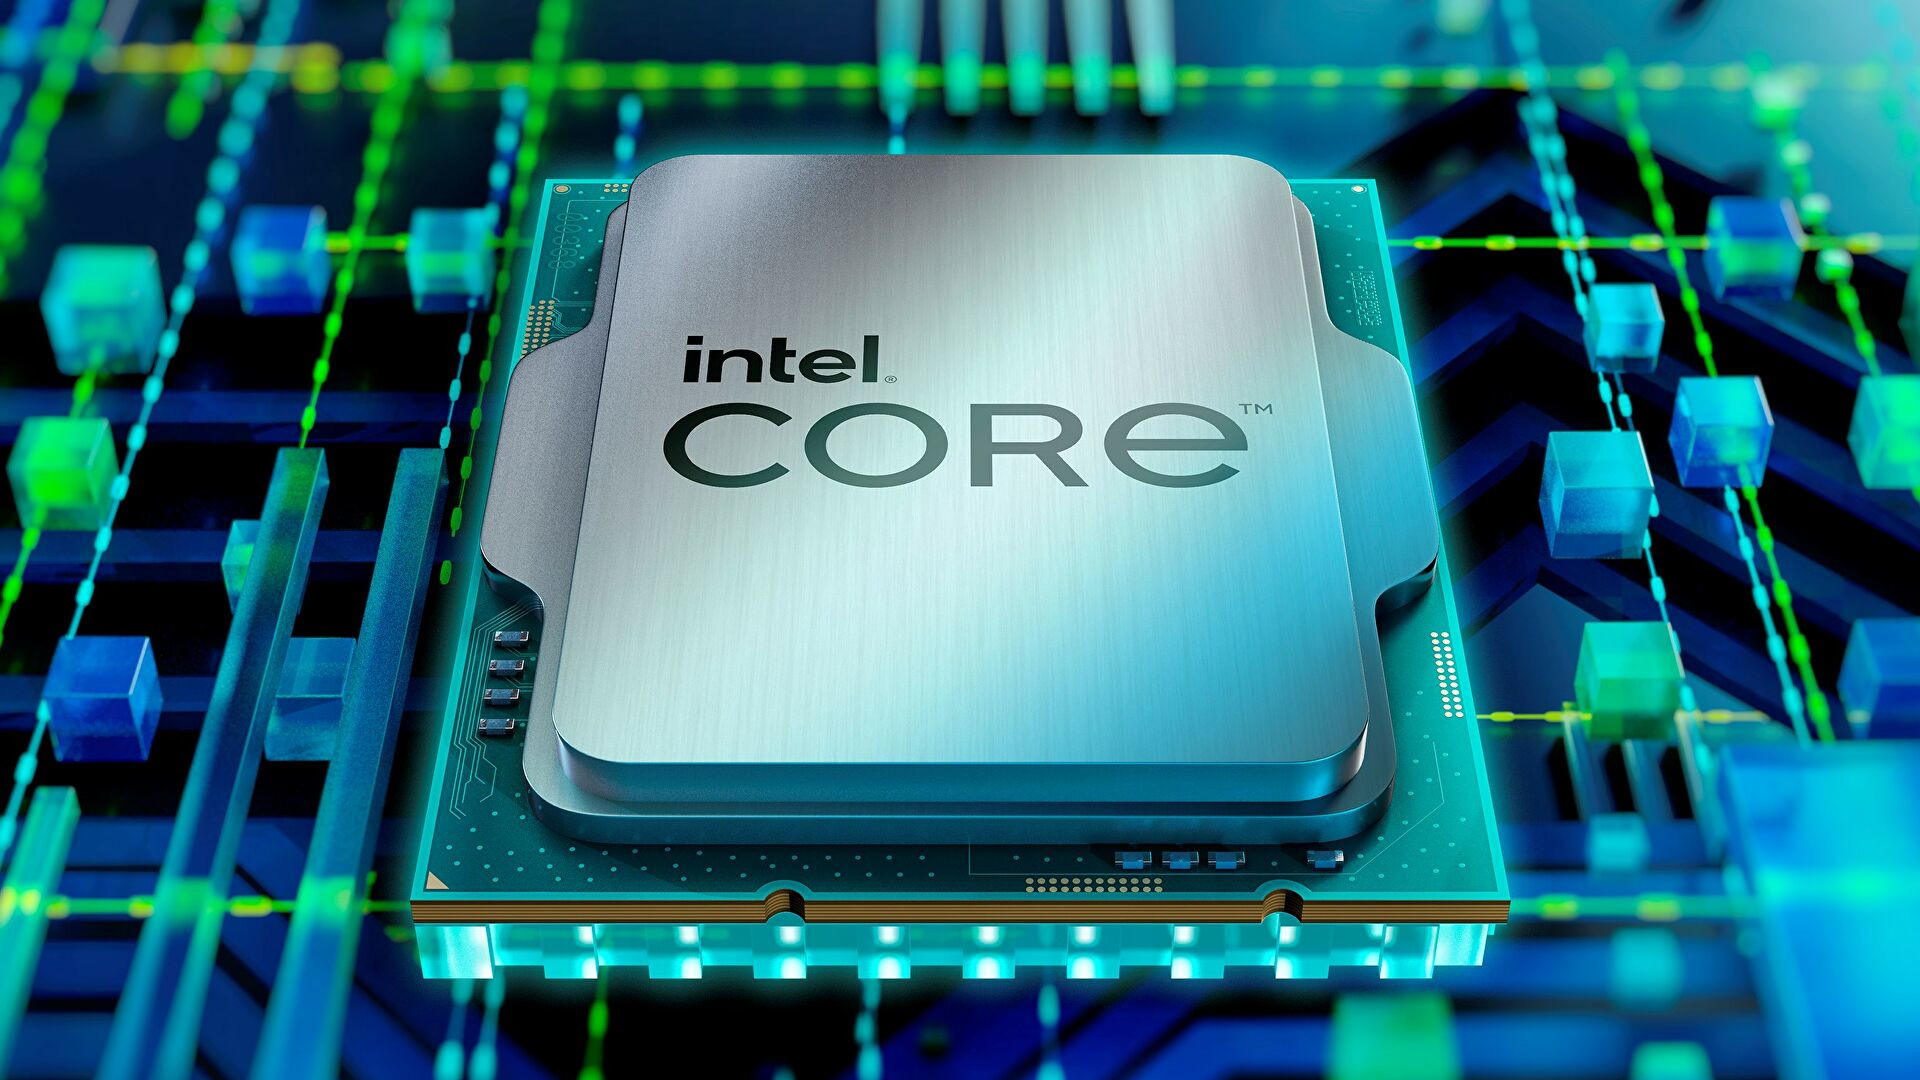 Intel Raptor Lake CPU mostly outperforms Core i9 12900K in benchmarks